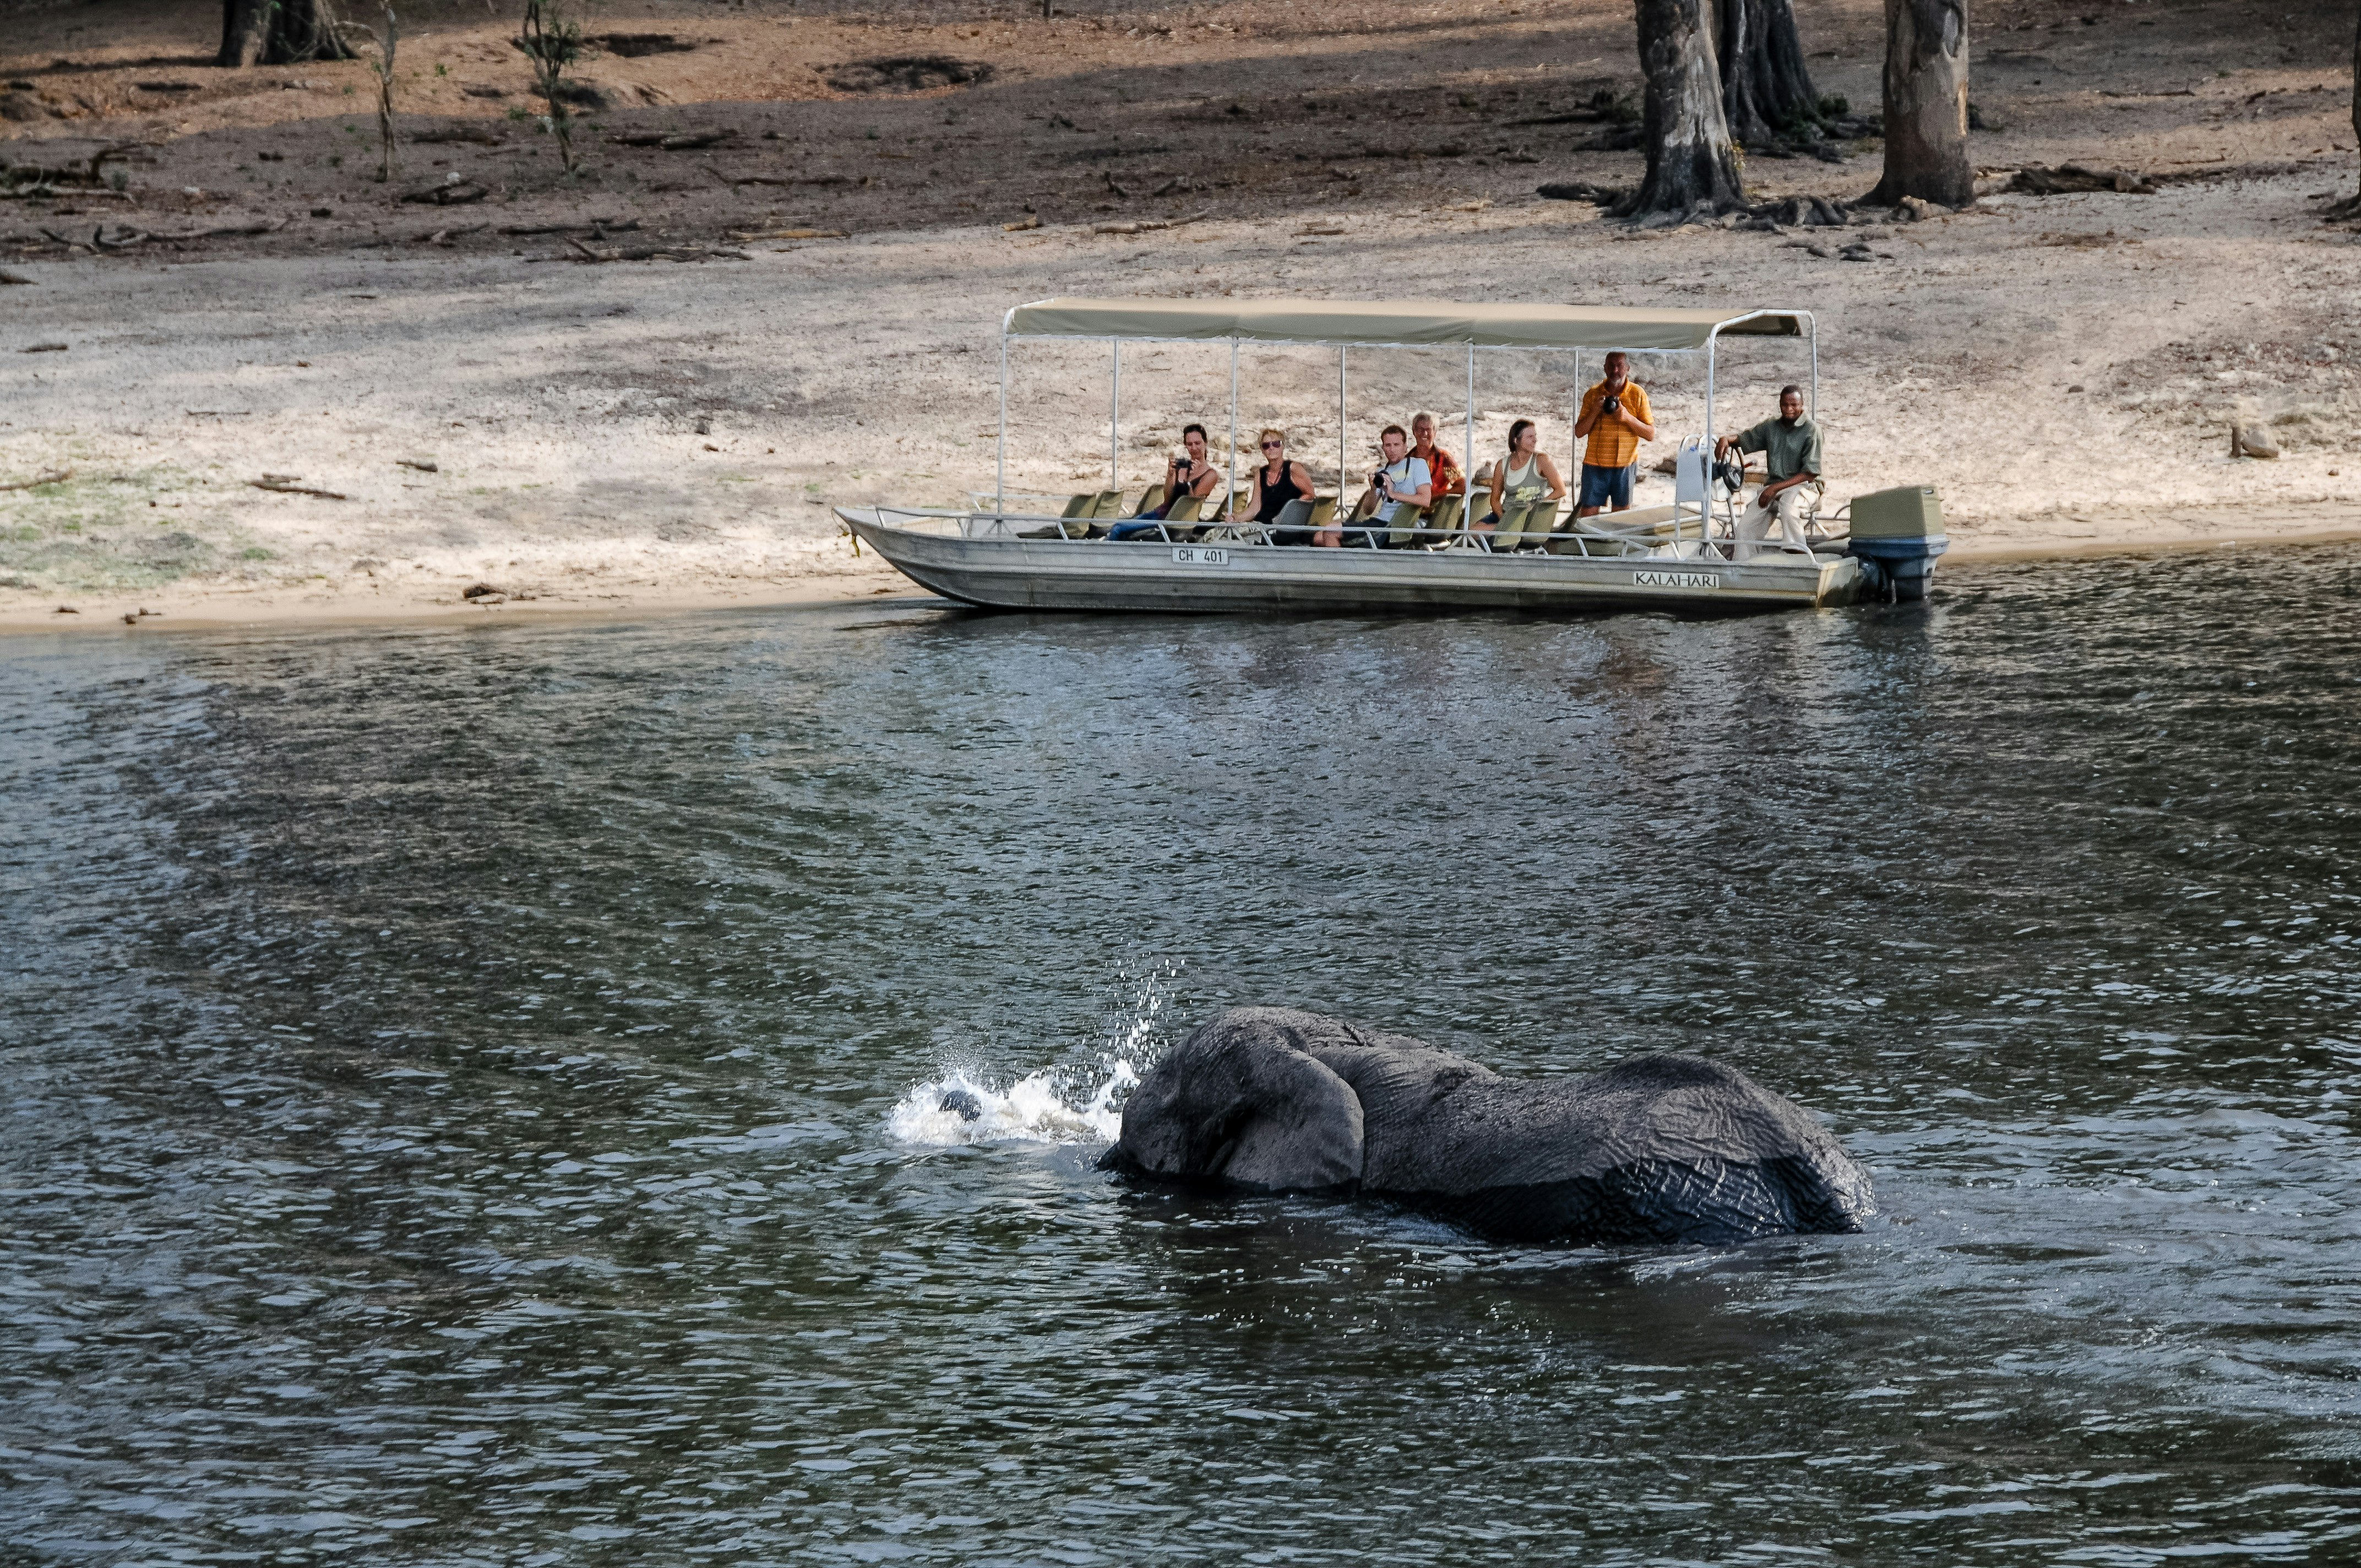 Elephant crosses the Chobe River as a safari tour in a boat looks on